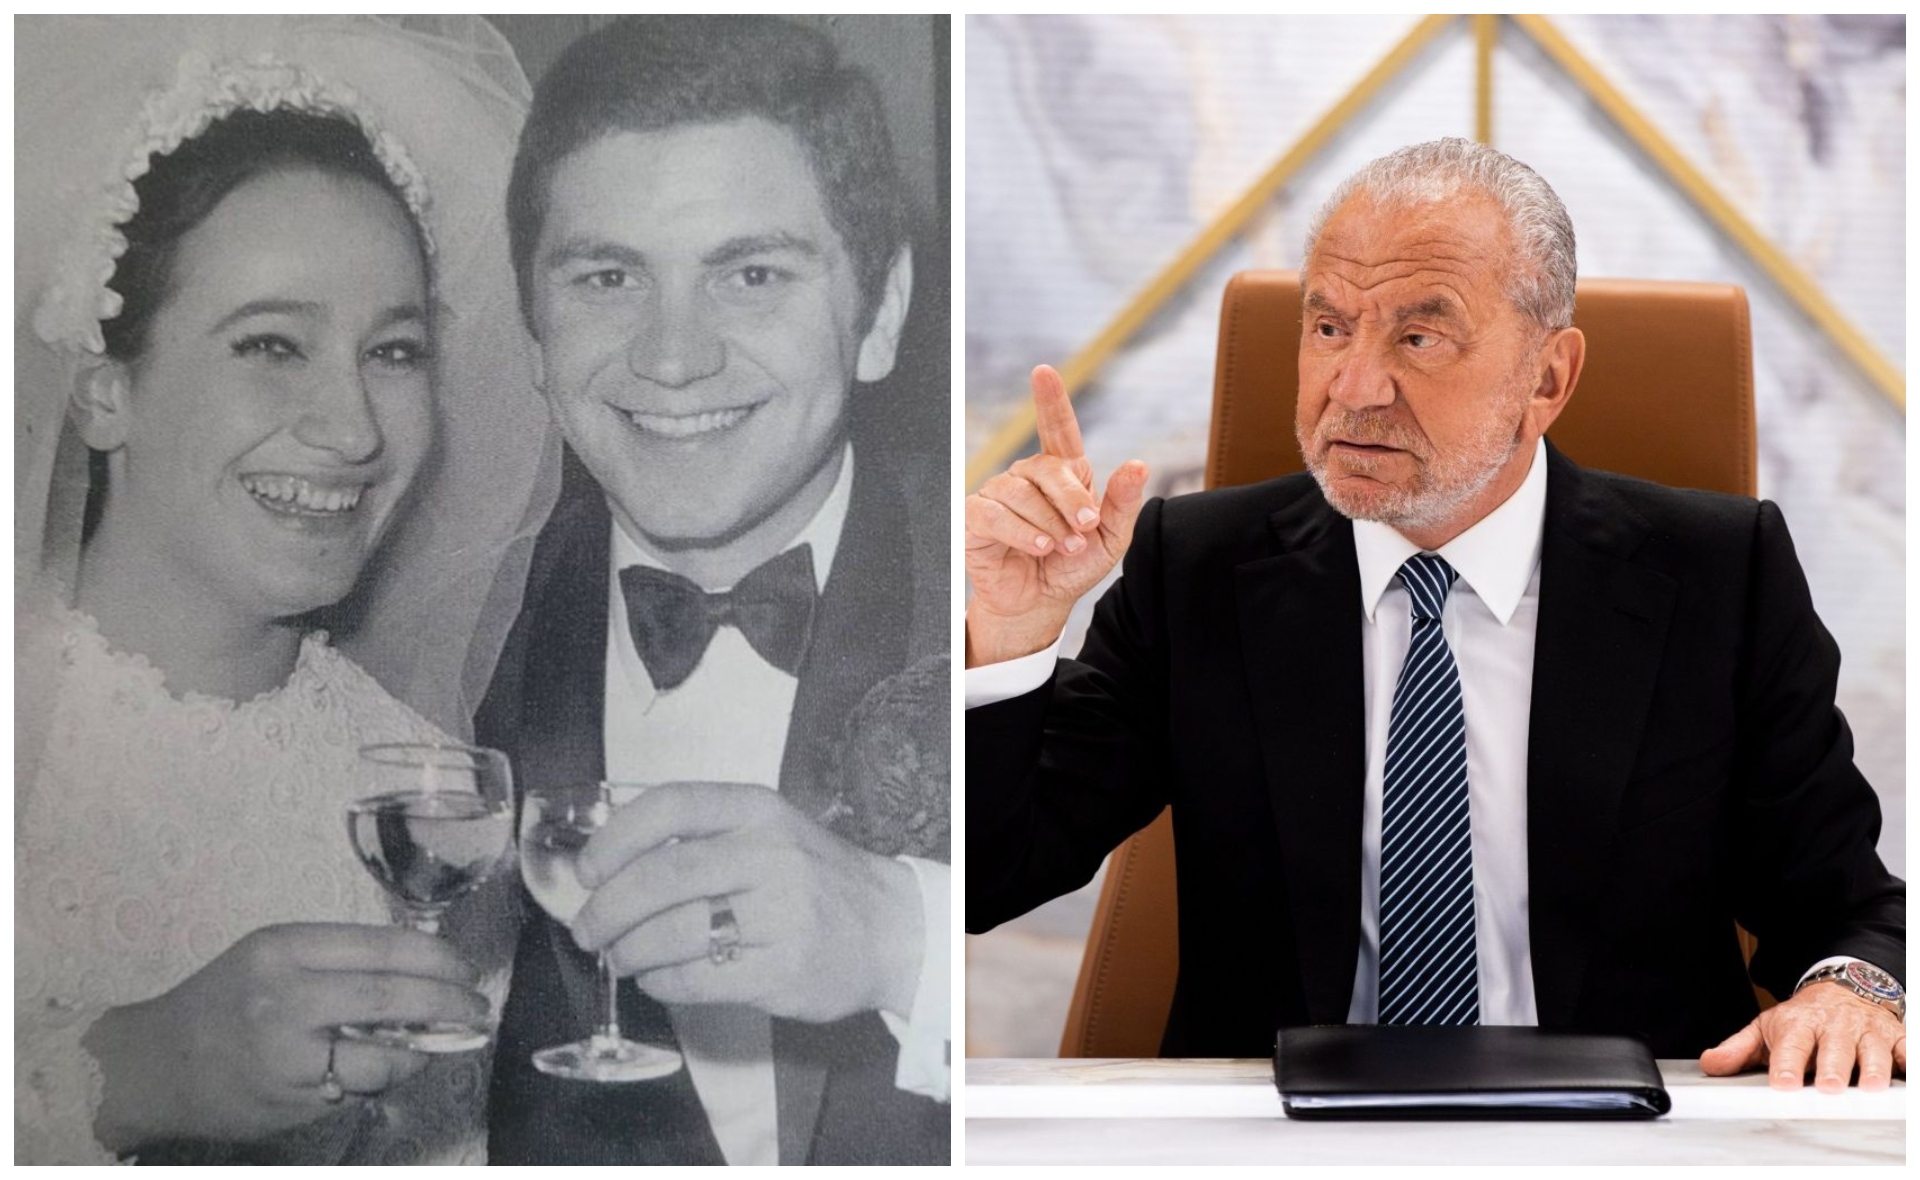 Lord Alan Sugar may have a tough-as-nails exterior on Celebrity Apprentice, but his relationship with his wife is as sweet as his name